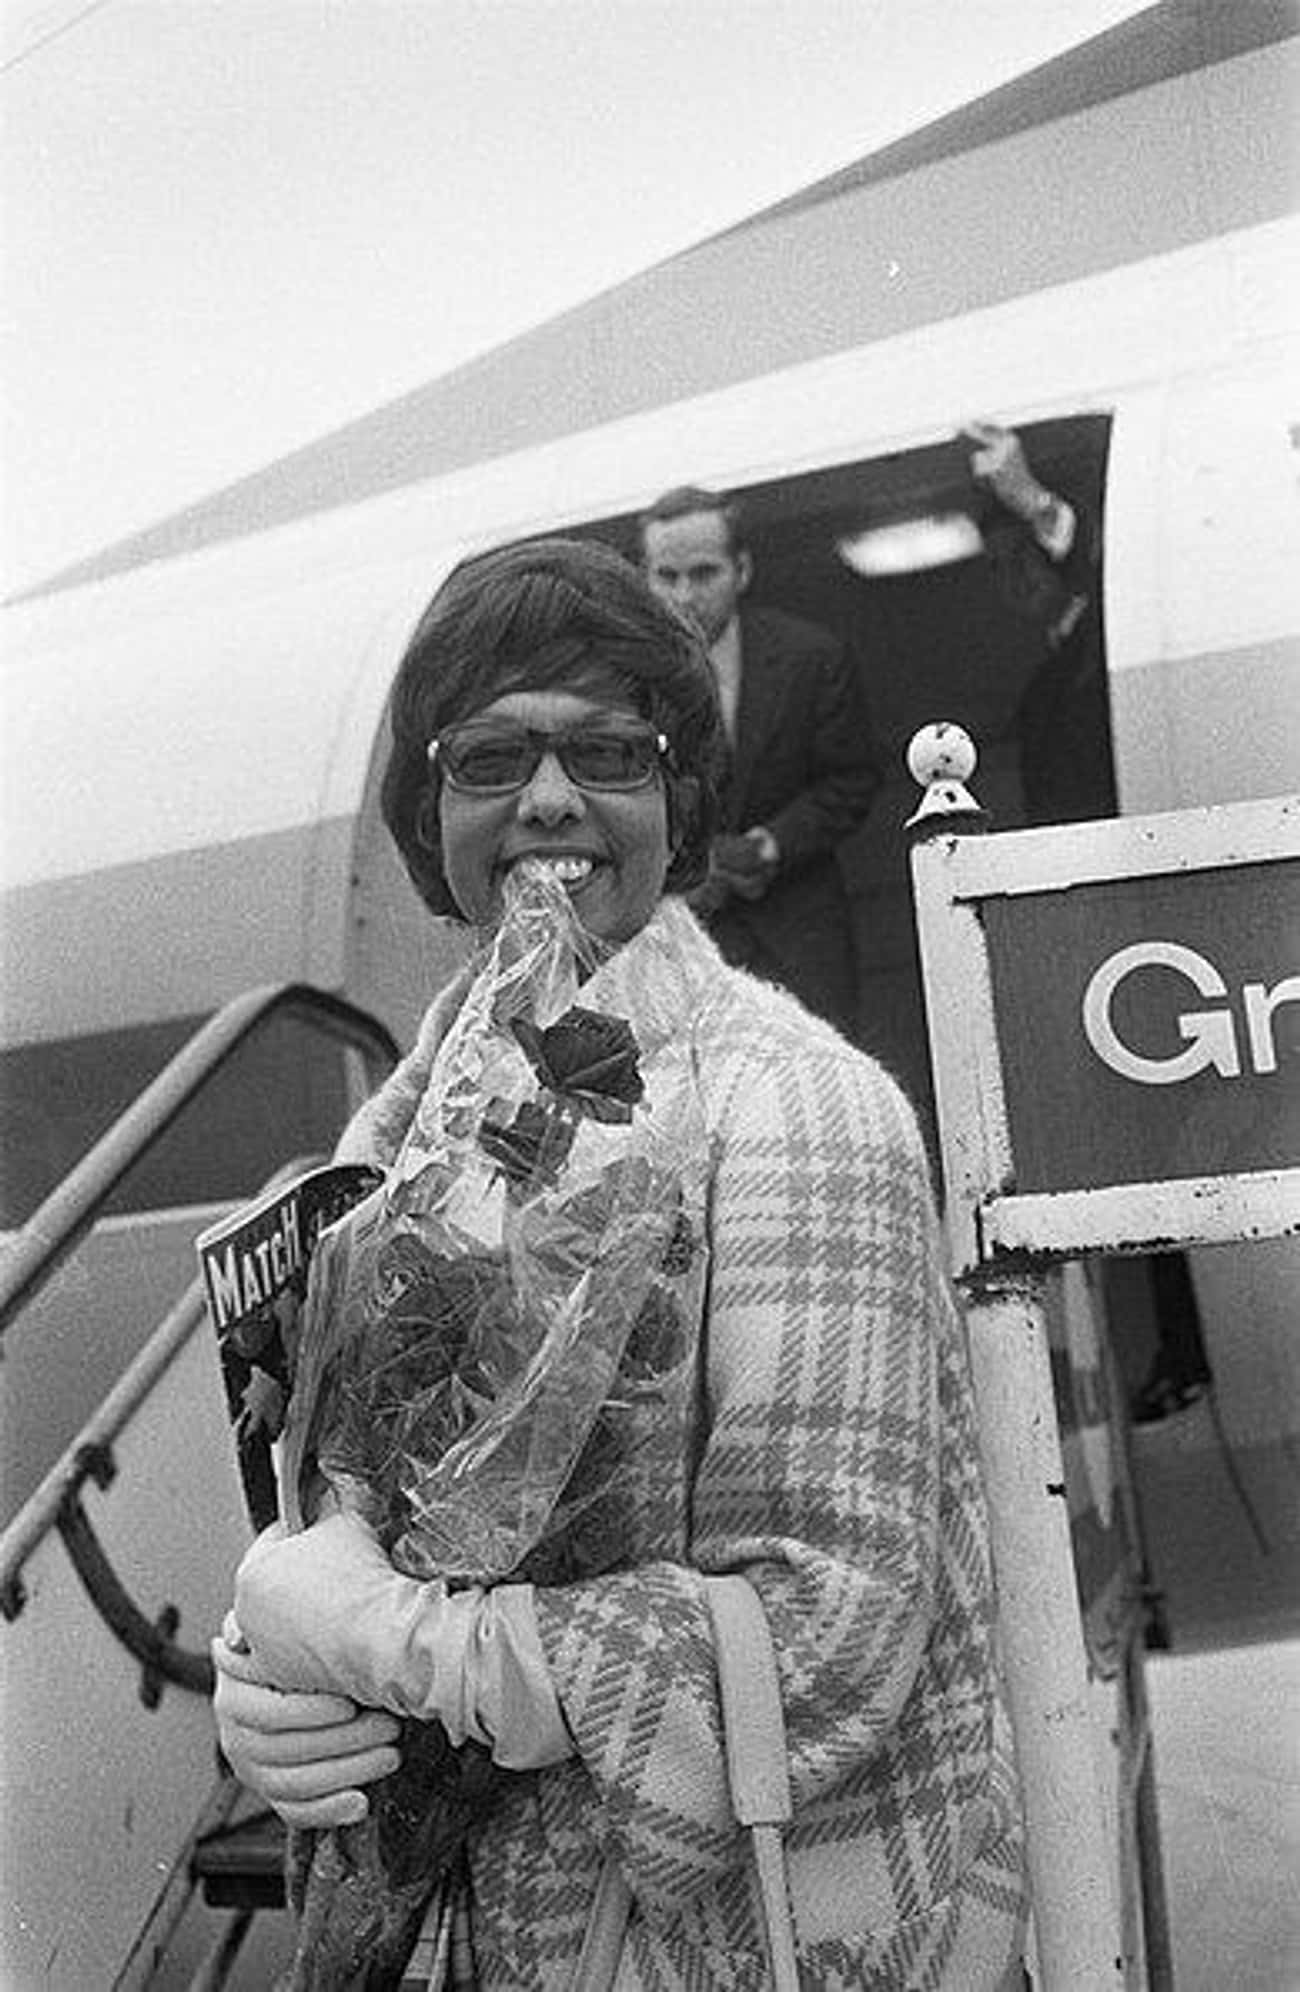 Baker Was The Only Official Female Speaker At The 1963 March On Washington